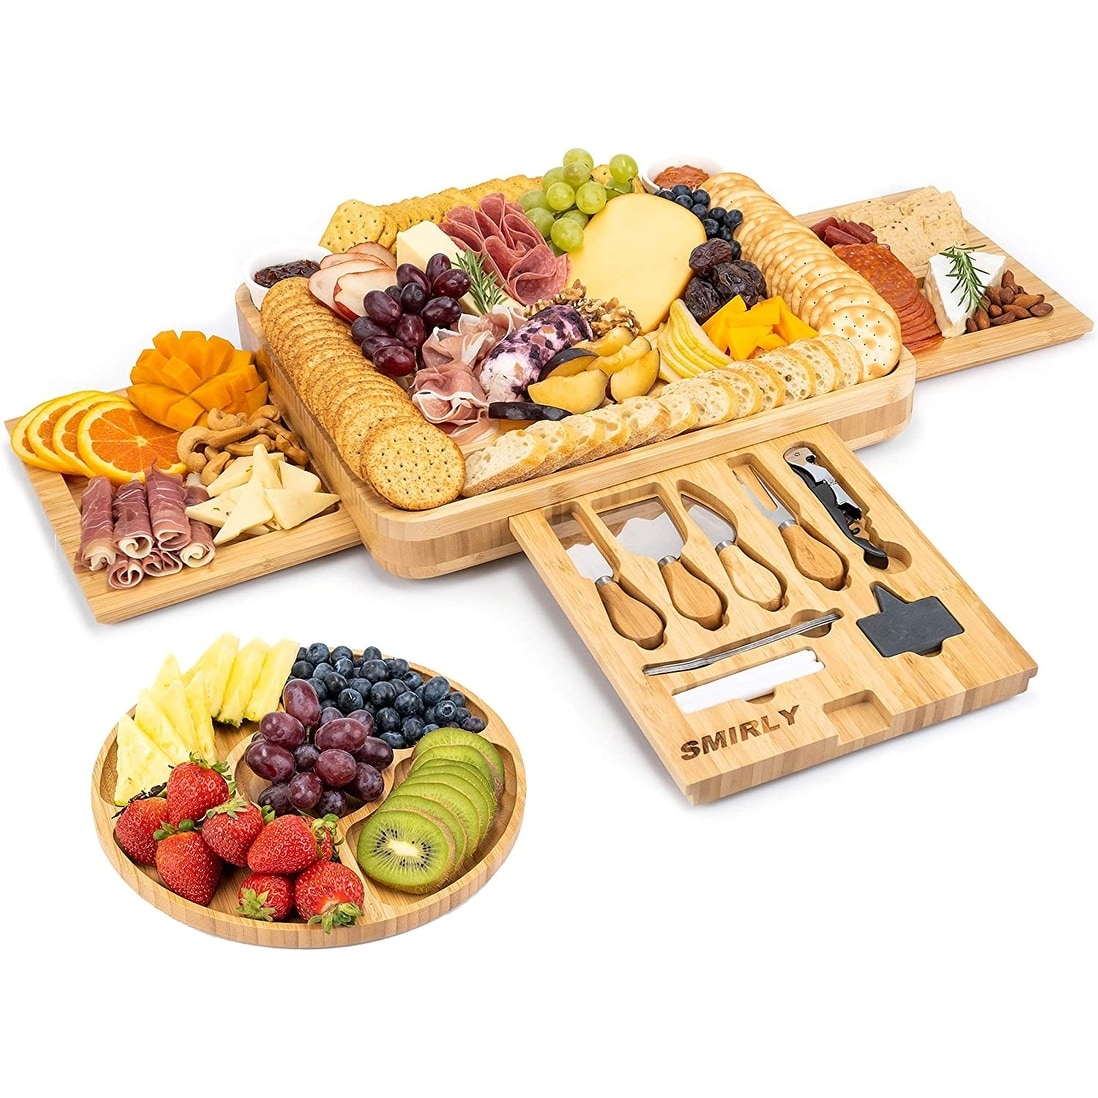 https://ak1.ostkcdn.com/images/products/is/images/direct/f287fbdad76e3fa00e28d815729c9fbe181e061b/SMIRLY-Large-Charcuterie-Boards-Set%3A-Bamboo-Cheese-Board-and-Knife-Set---Unique-Christmas-Gifts-for-Women%2C-House-Warming-Gifts.jpg